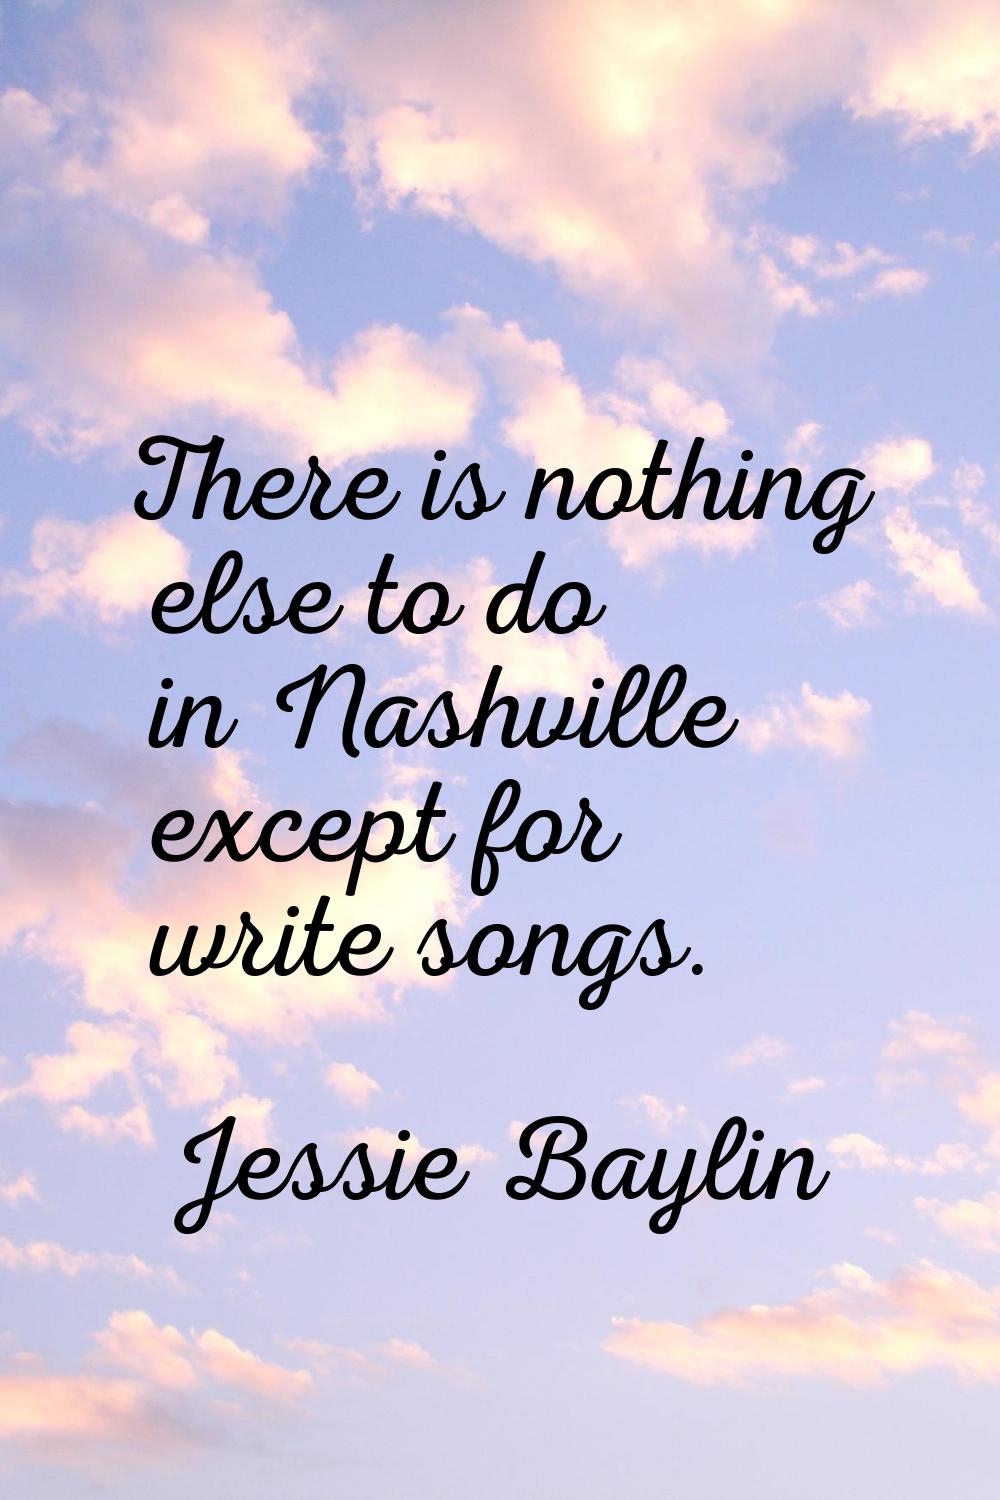 There is nothing else to do in Nashville except for write songs.